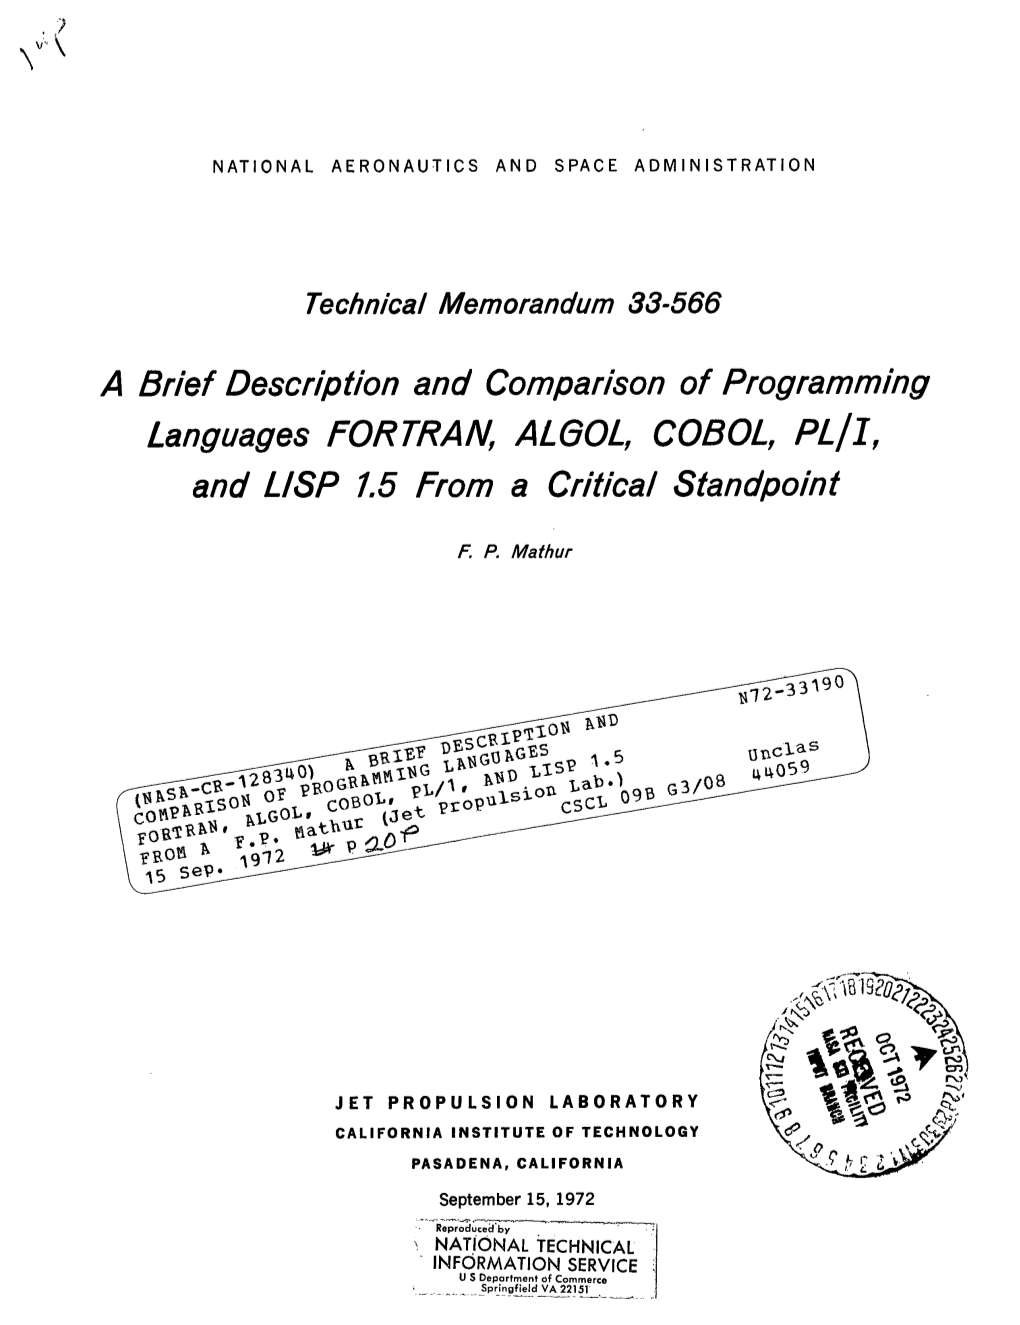 A Brief Description and Comparison of Programming Languages FORTRAN, ALGOL, COBOL, and LISP 1.5 from a Critical Standpoint